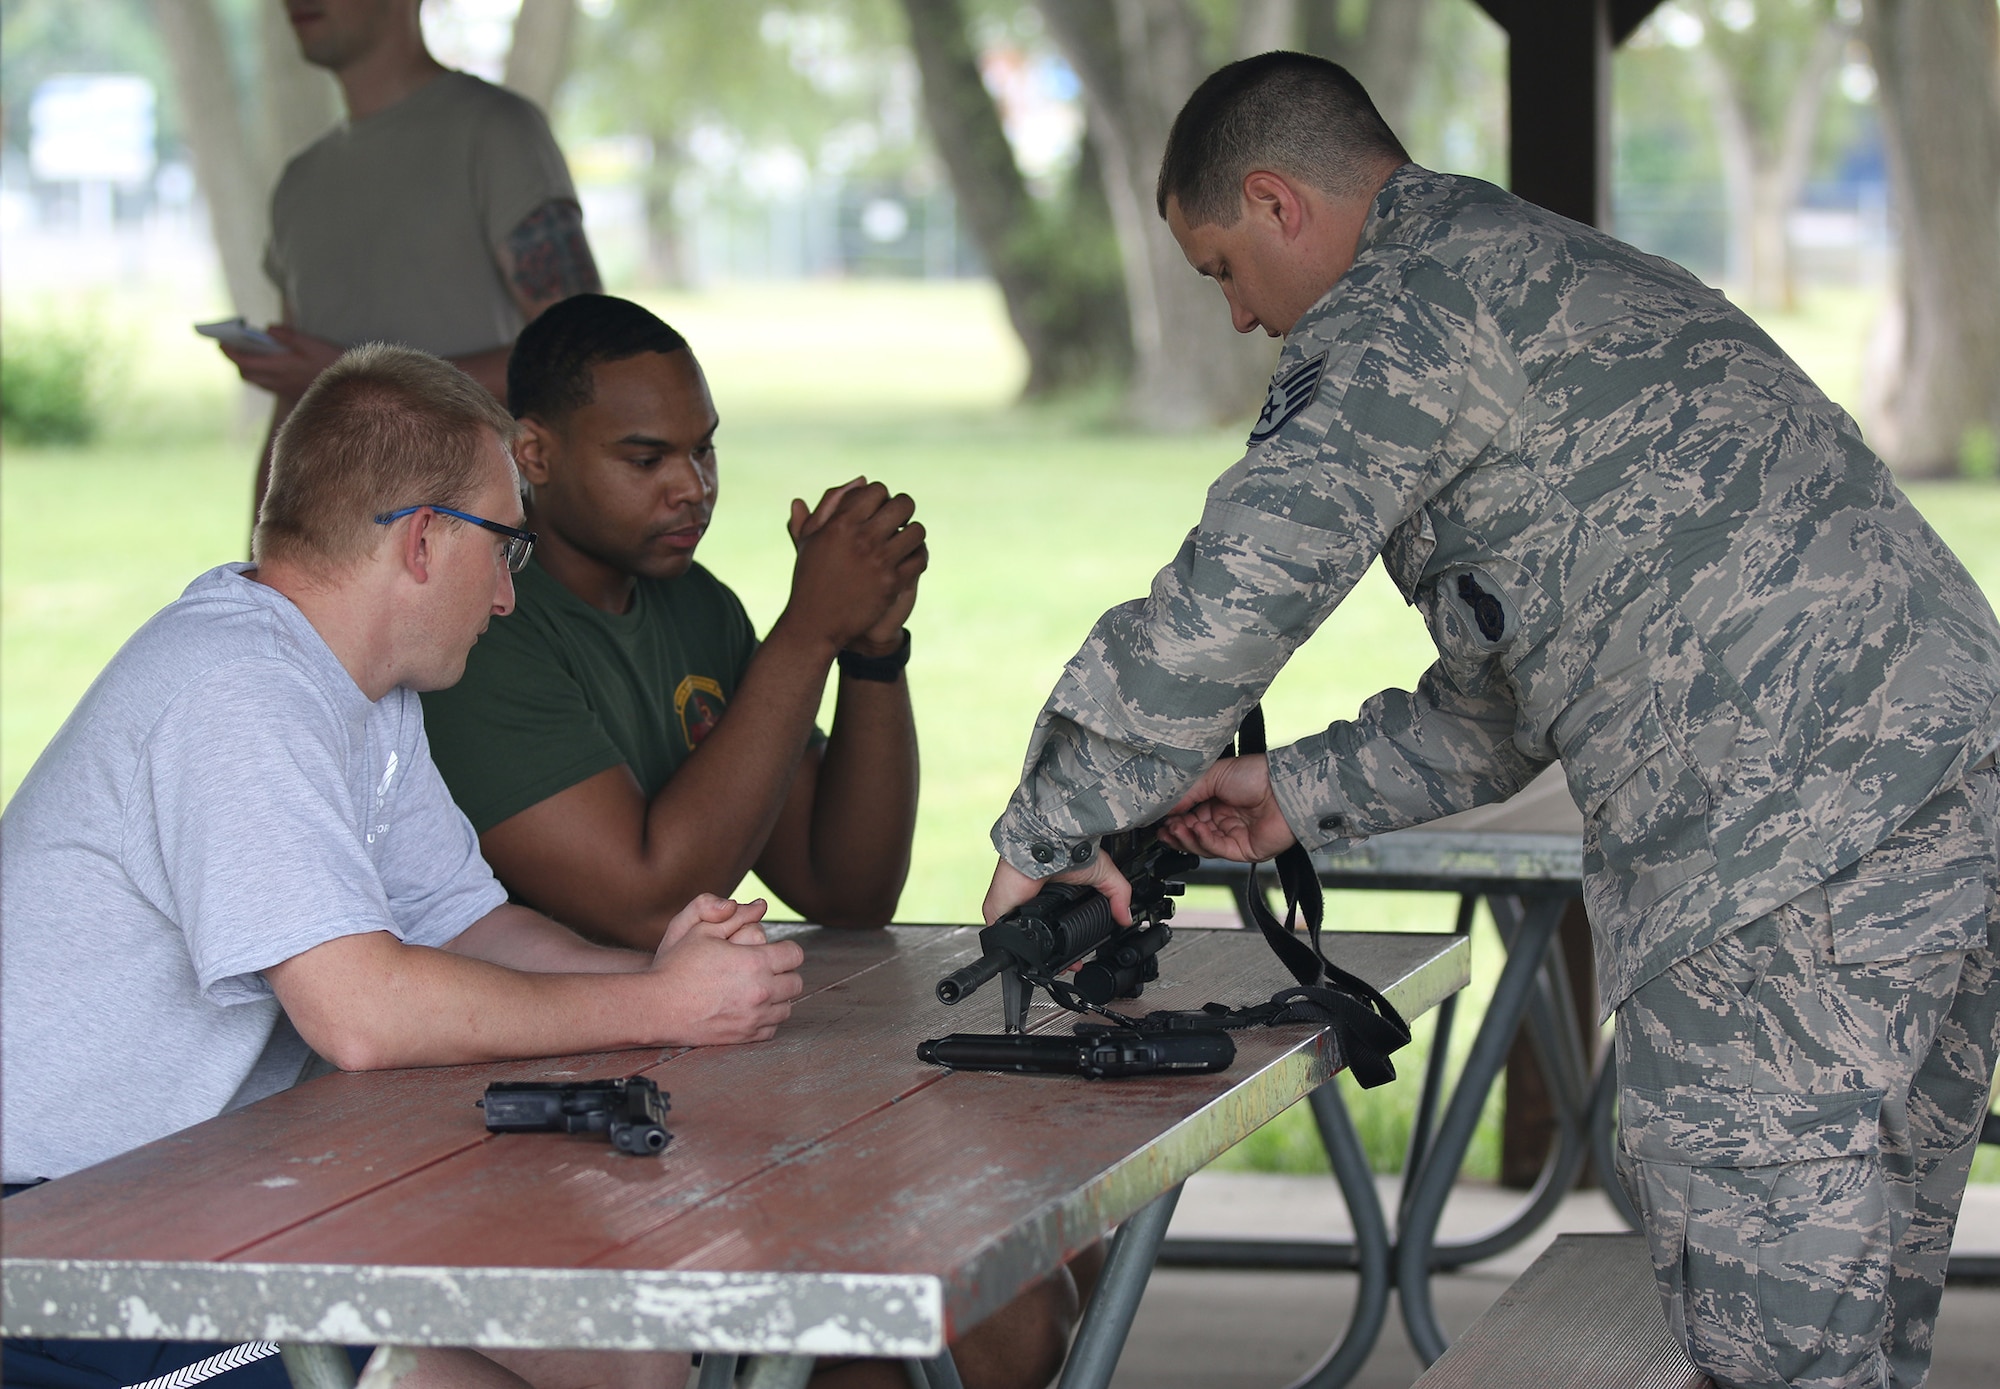 Senior Airman Markell Lawson and Staff Sgt. Steven Branham, 445th Aerospace Medicine Squadron, receive weapons handling training from Staff Sgt. Jordan Helphrey, 445th Security Forces Squadron, as a part of a team building exercise here June 6, 2018.